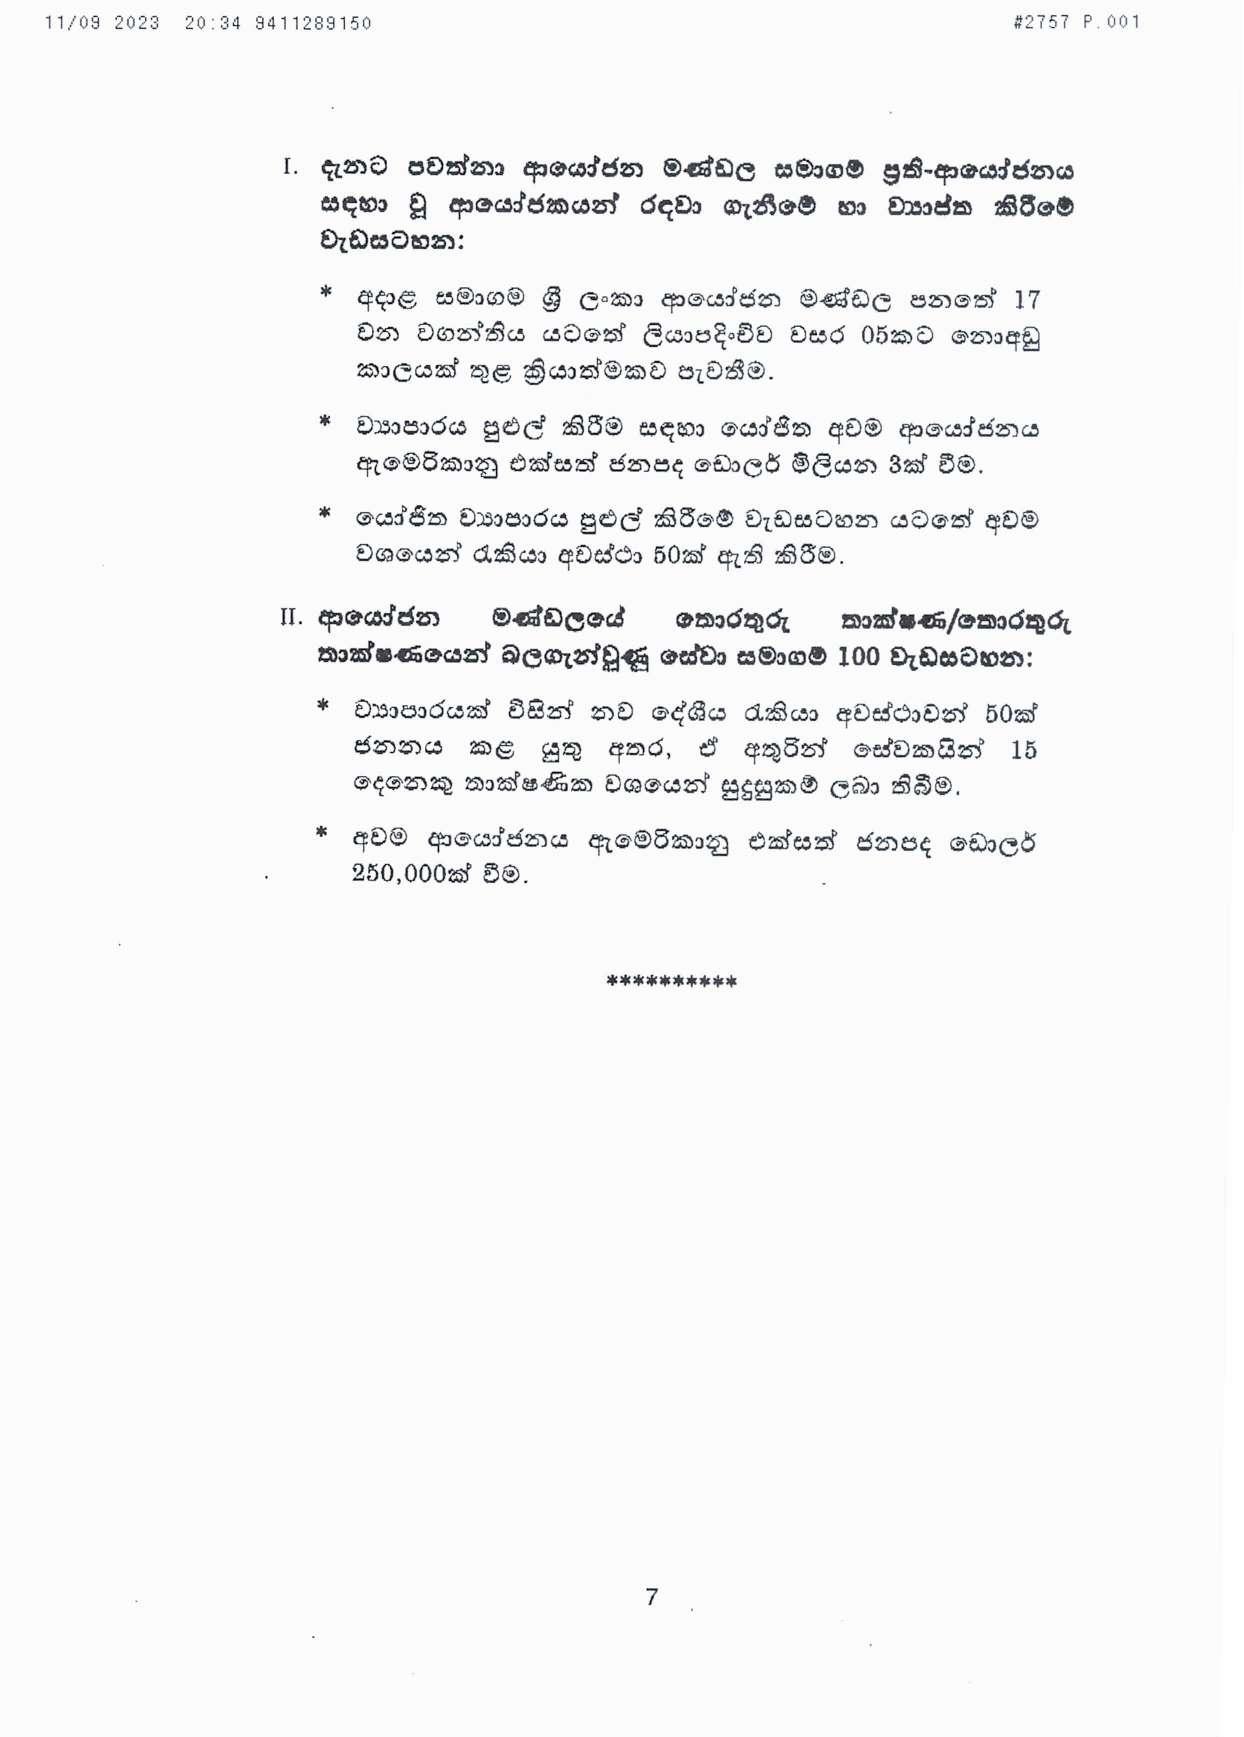 Cabinet Decision on 11.09.2023 page 007